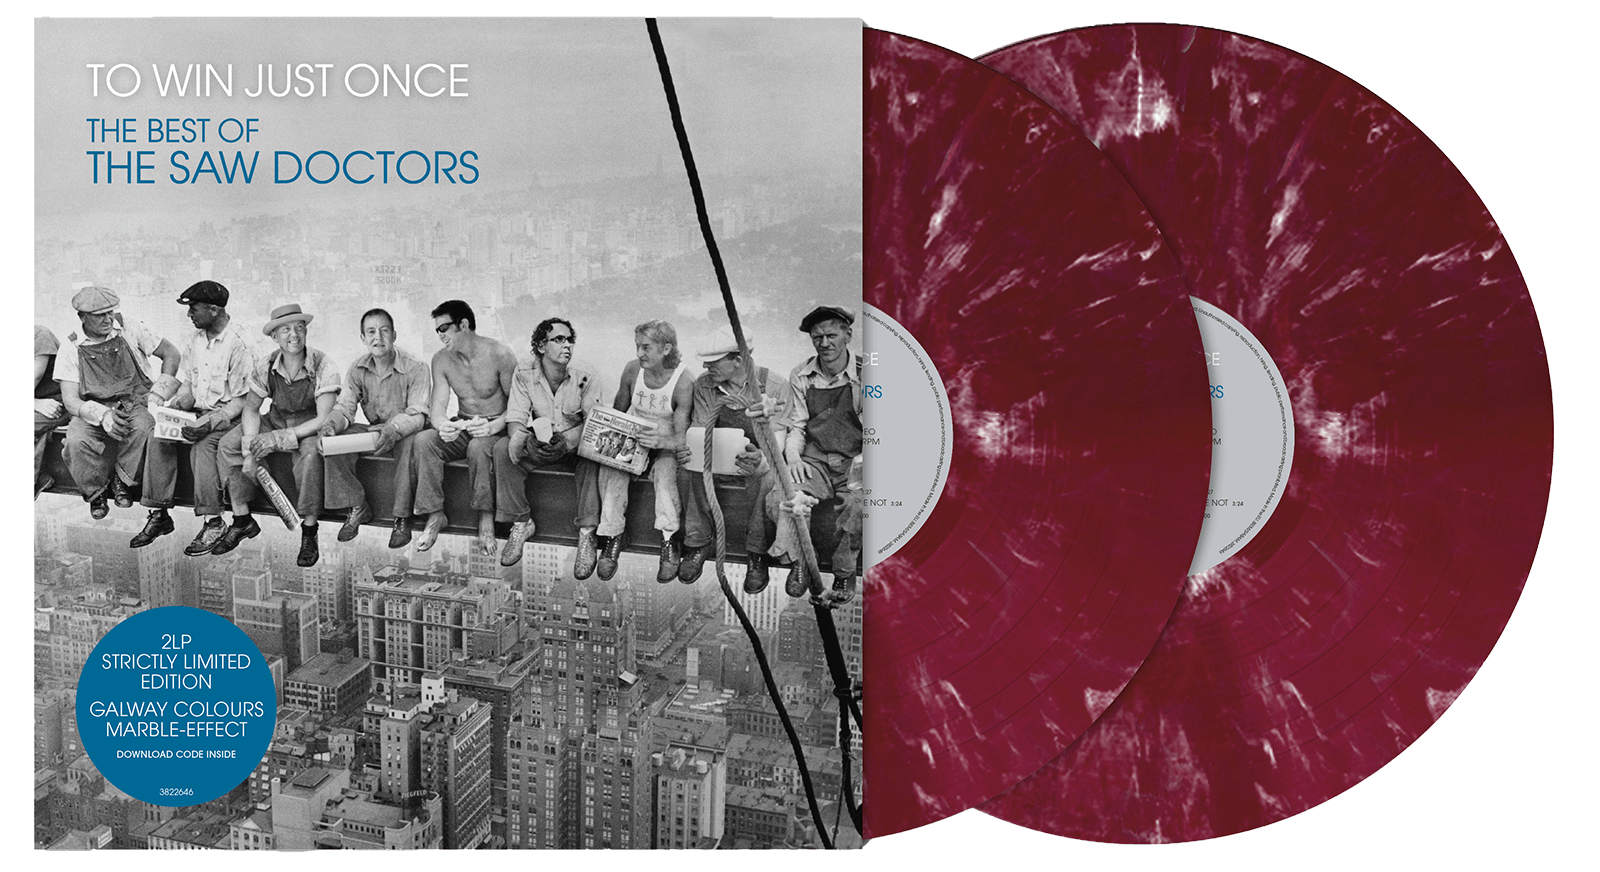 Saw Doctors – To Win Just Once - The Best Of 2LP Galway Colours Marble Effect Vinyl